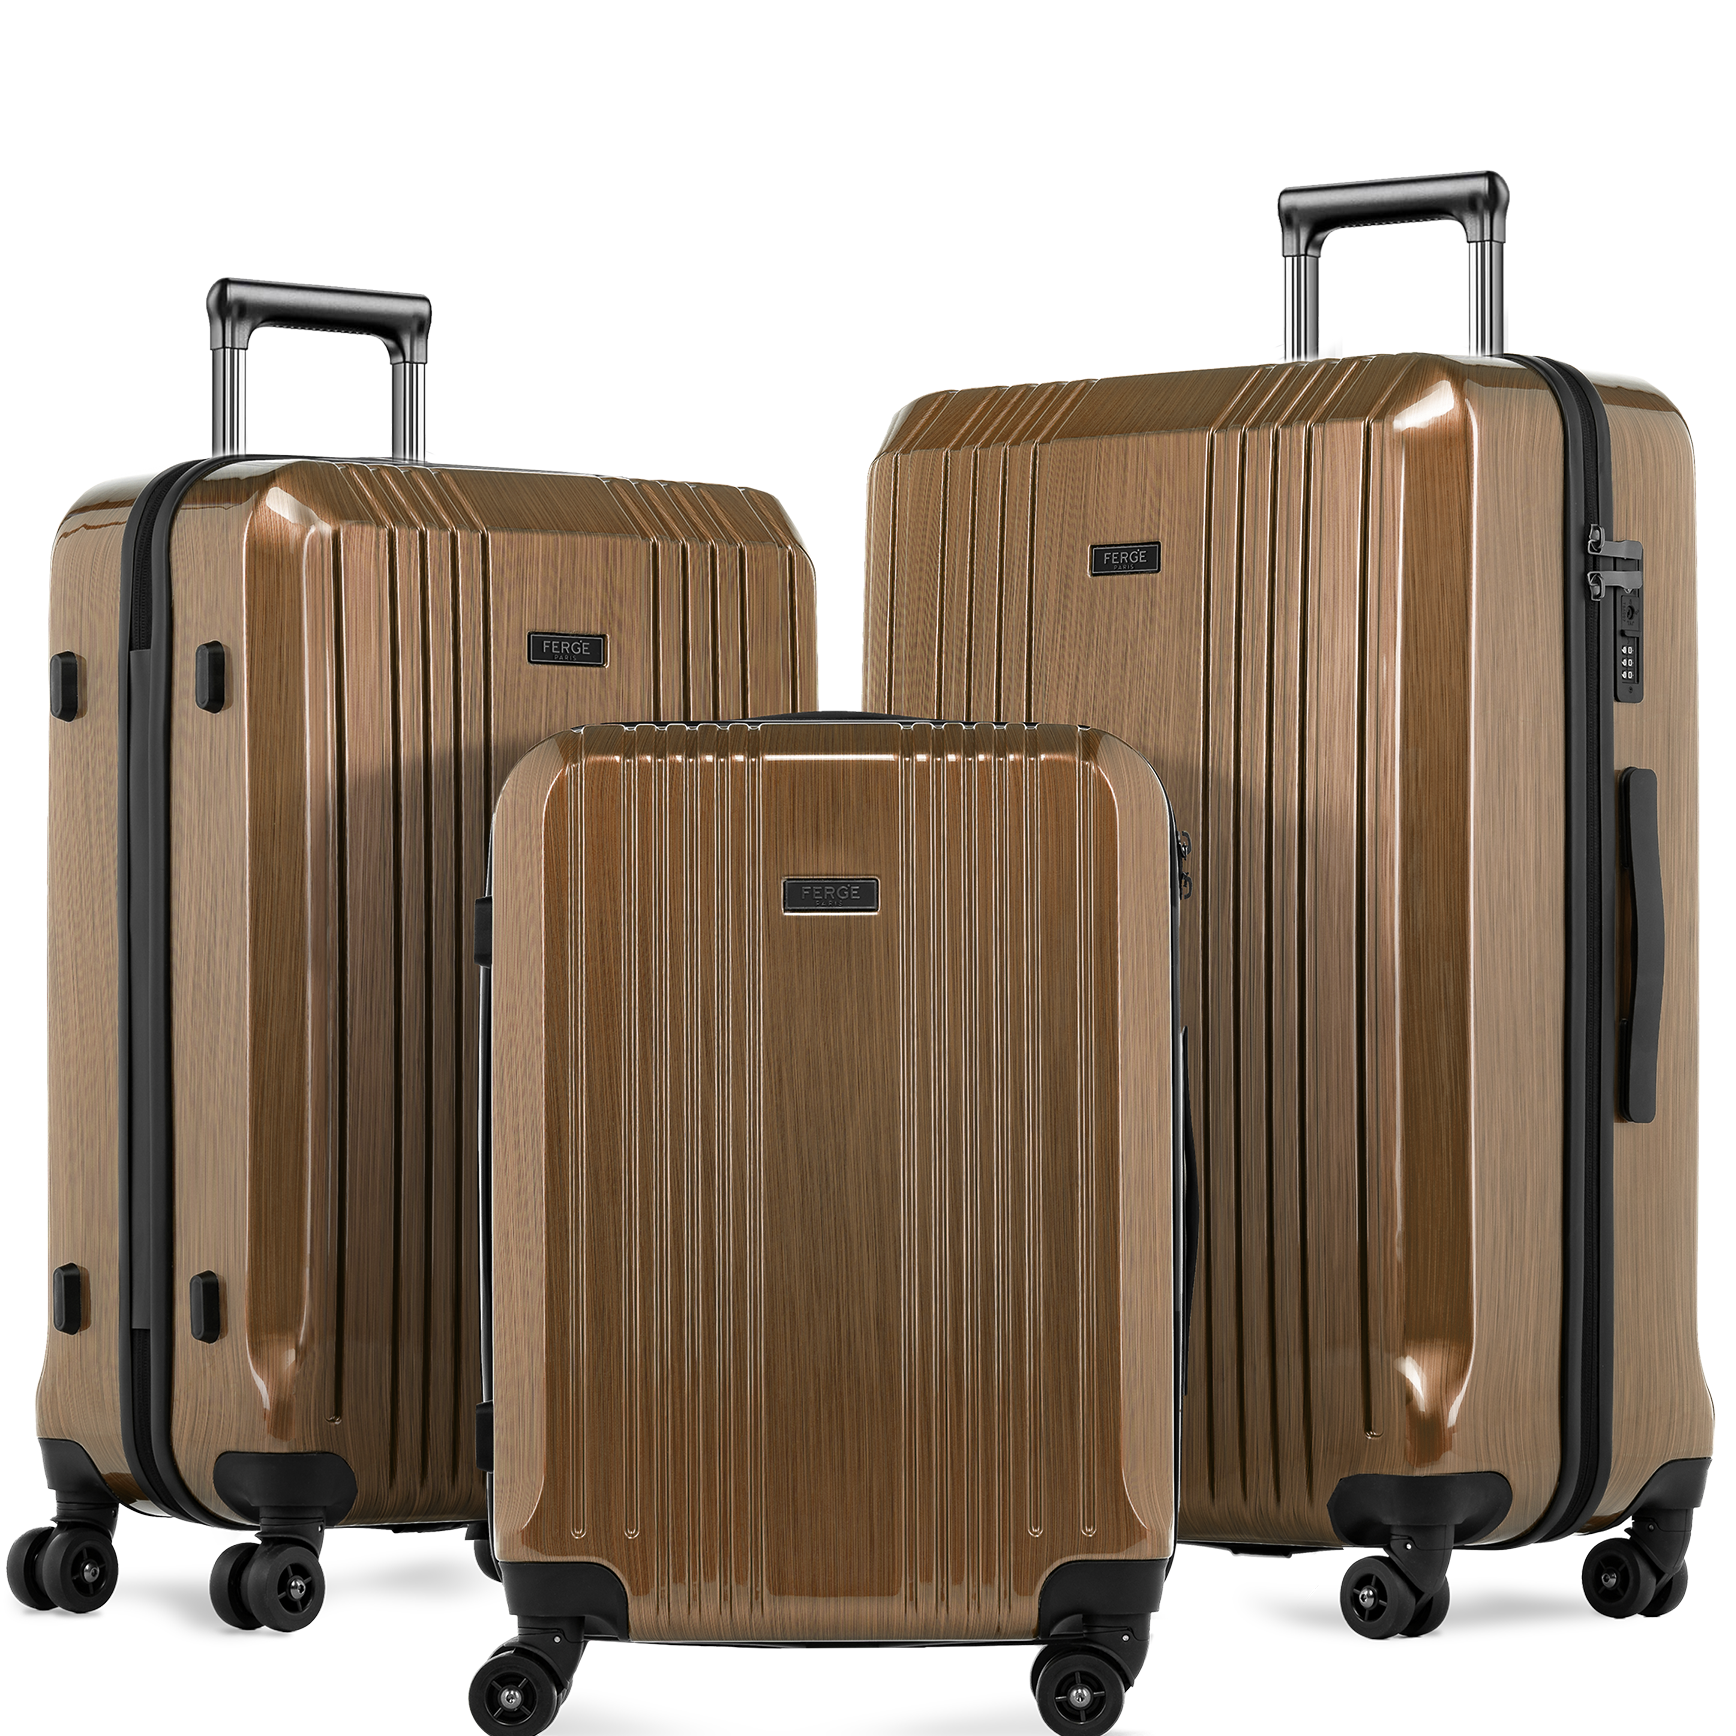 Case set 3-piece CANNES hard shell